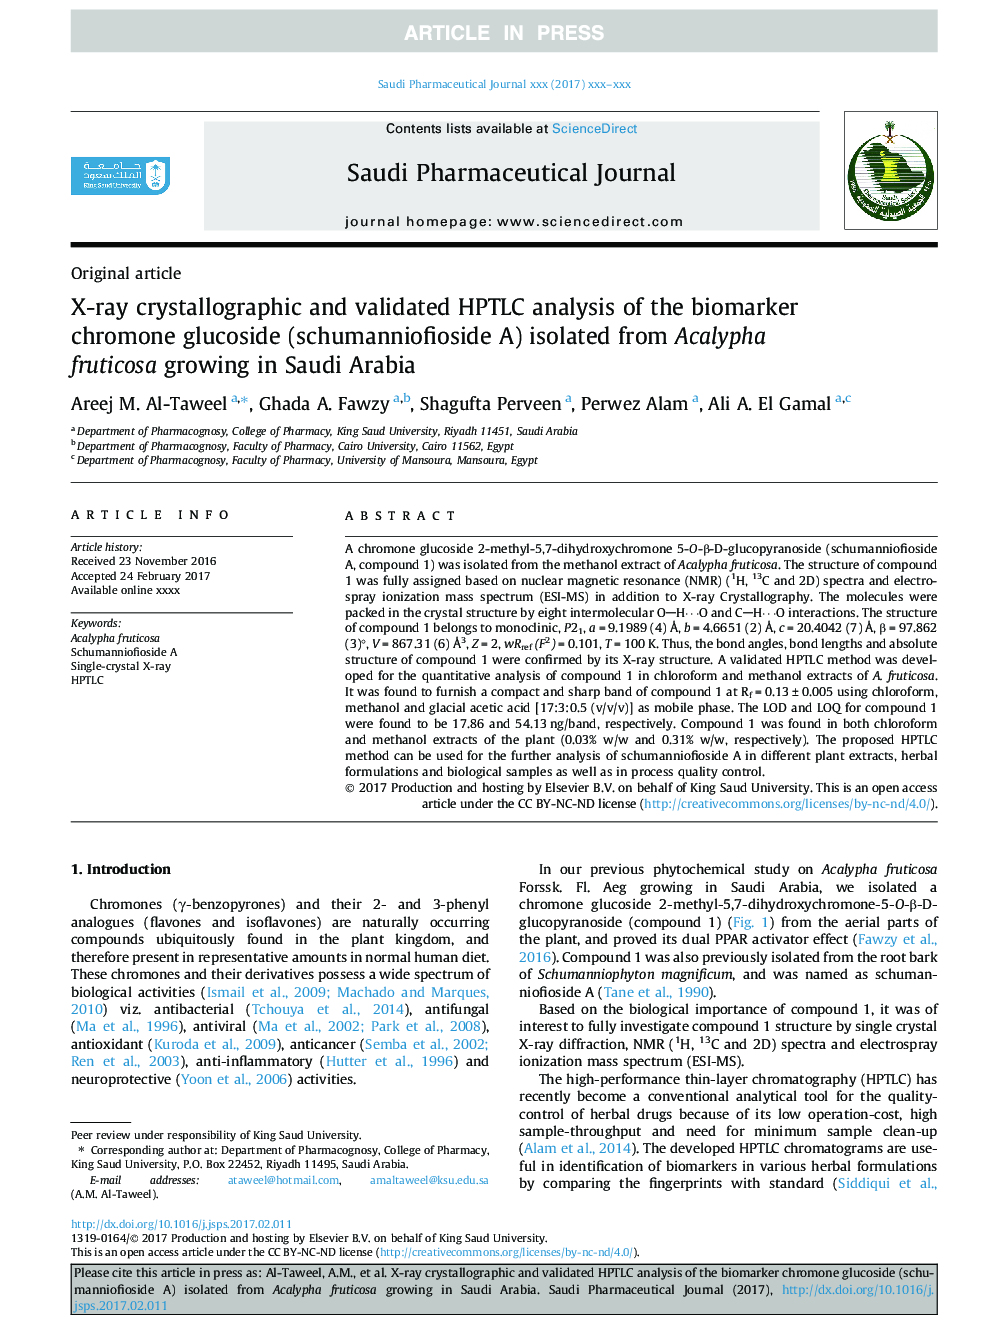 X-ray crystallographic and validated HPTLC analysis of the biomarker chromone glucoside (schumanniofioside A) isolated from Acalypha fruticosa growing in Saudi Arabia